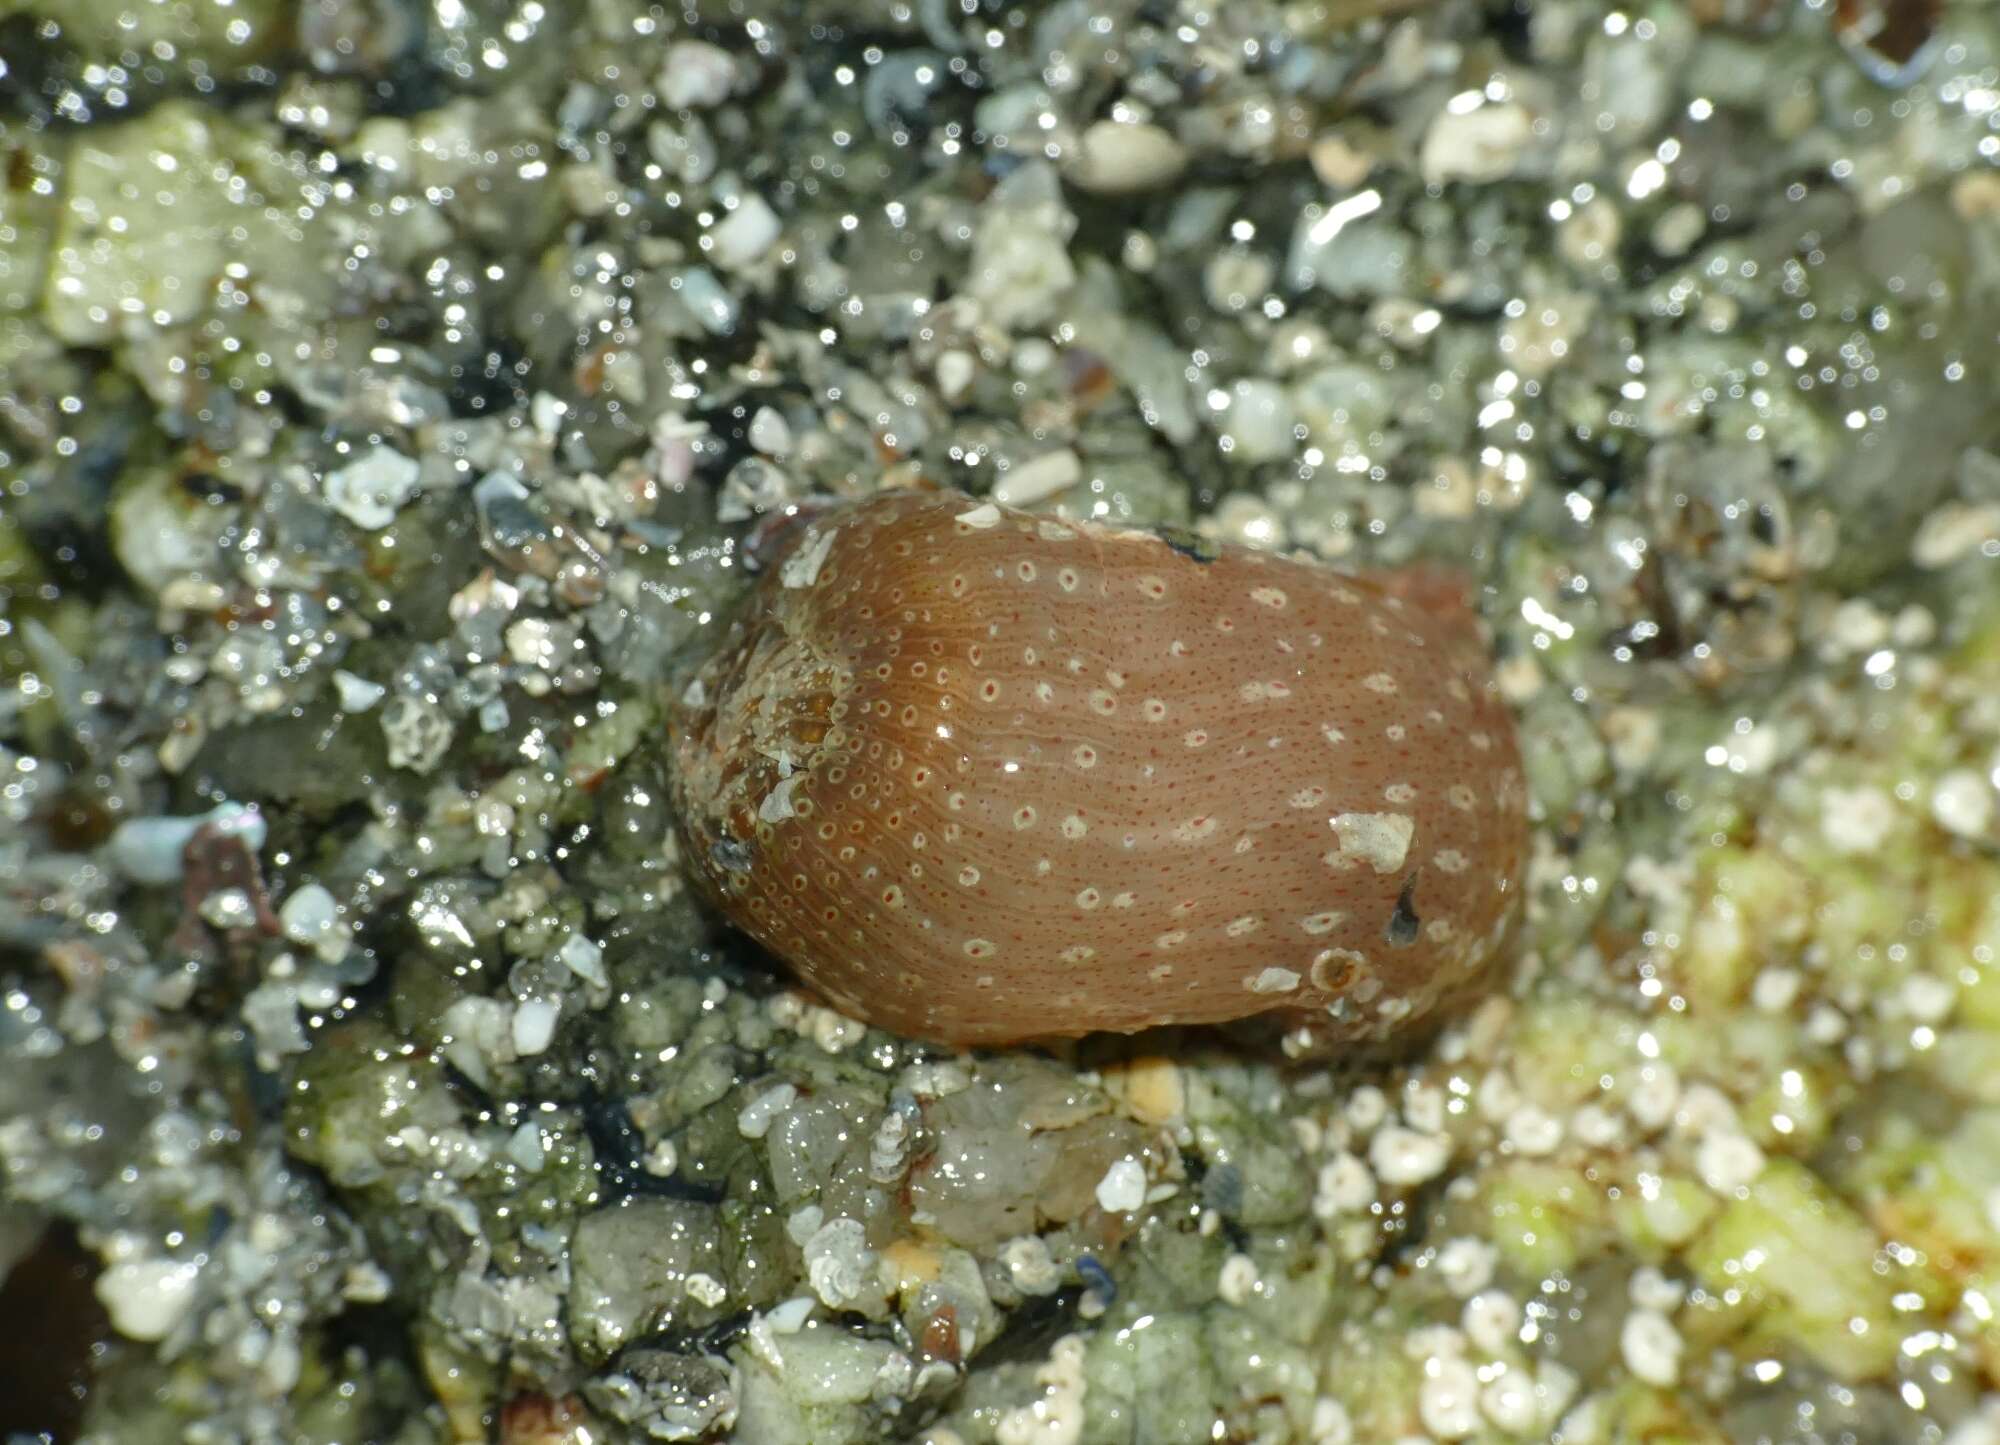 Image of red speckled anemone